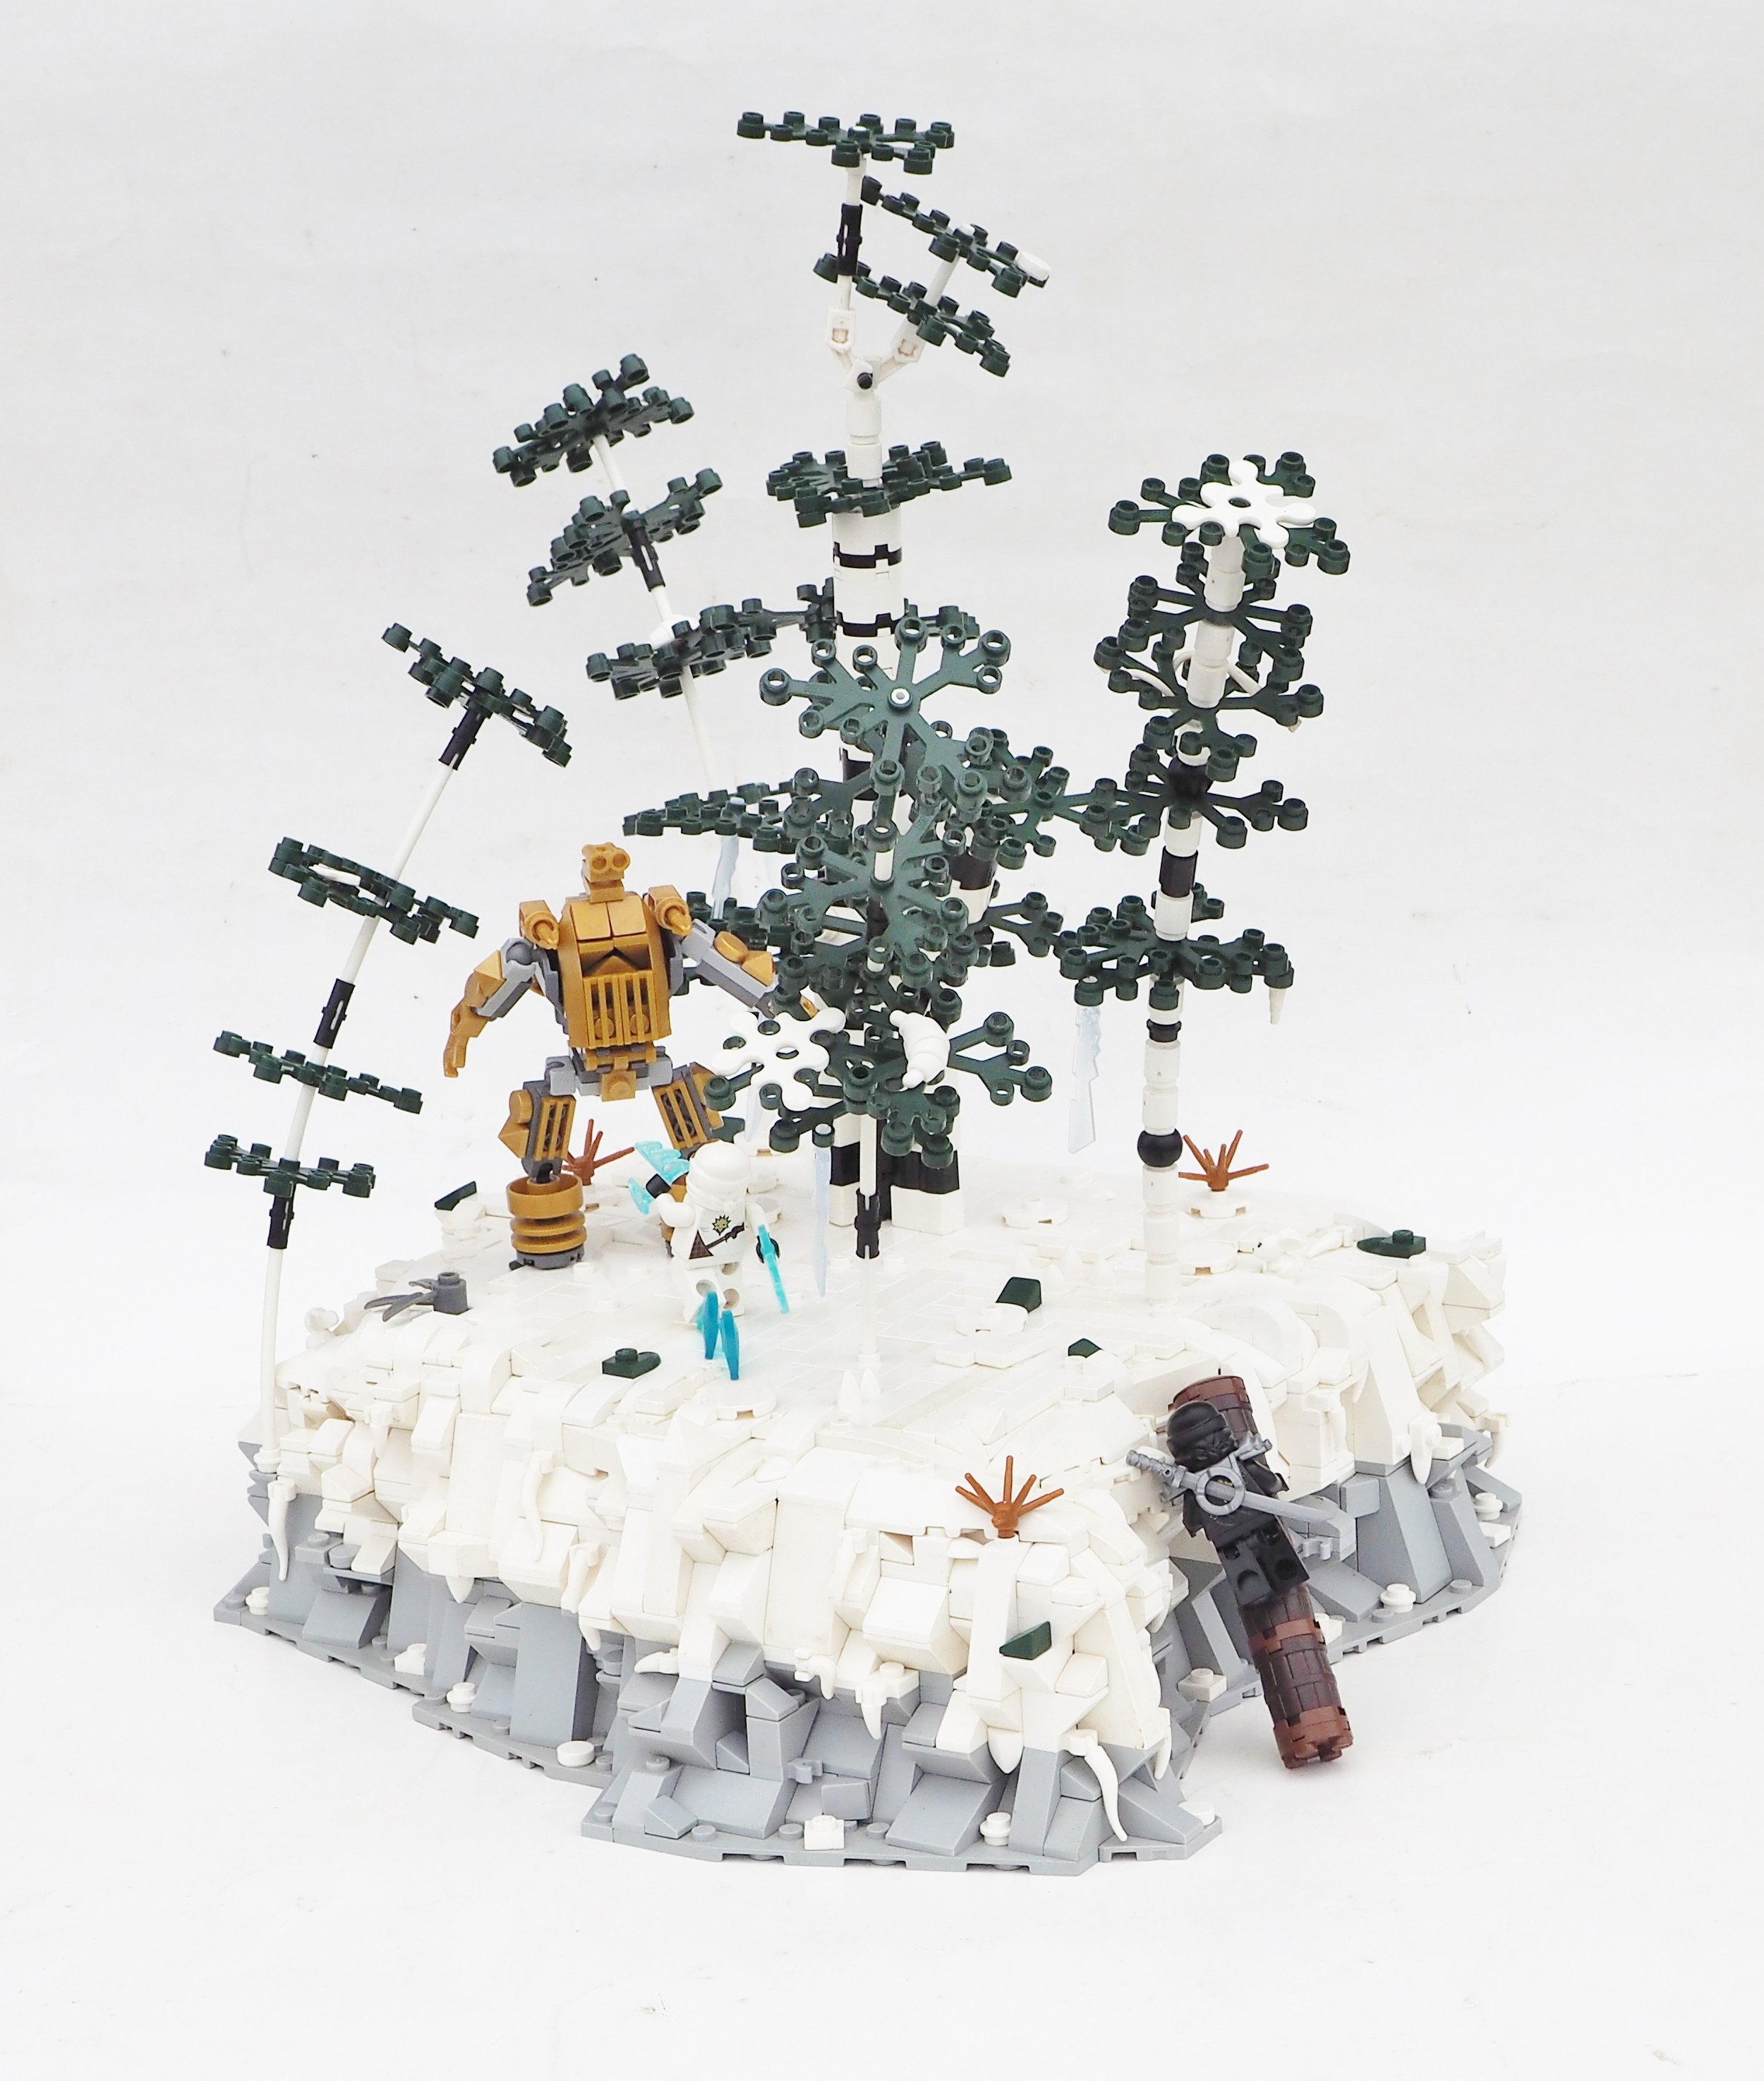  the MOC isn’t so bad, but it’s really hard to appreciate against a white background 